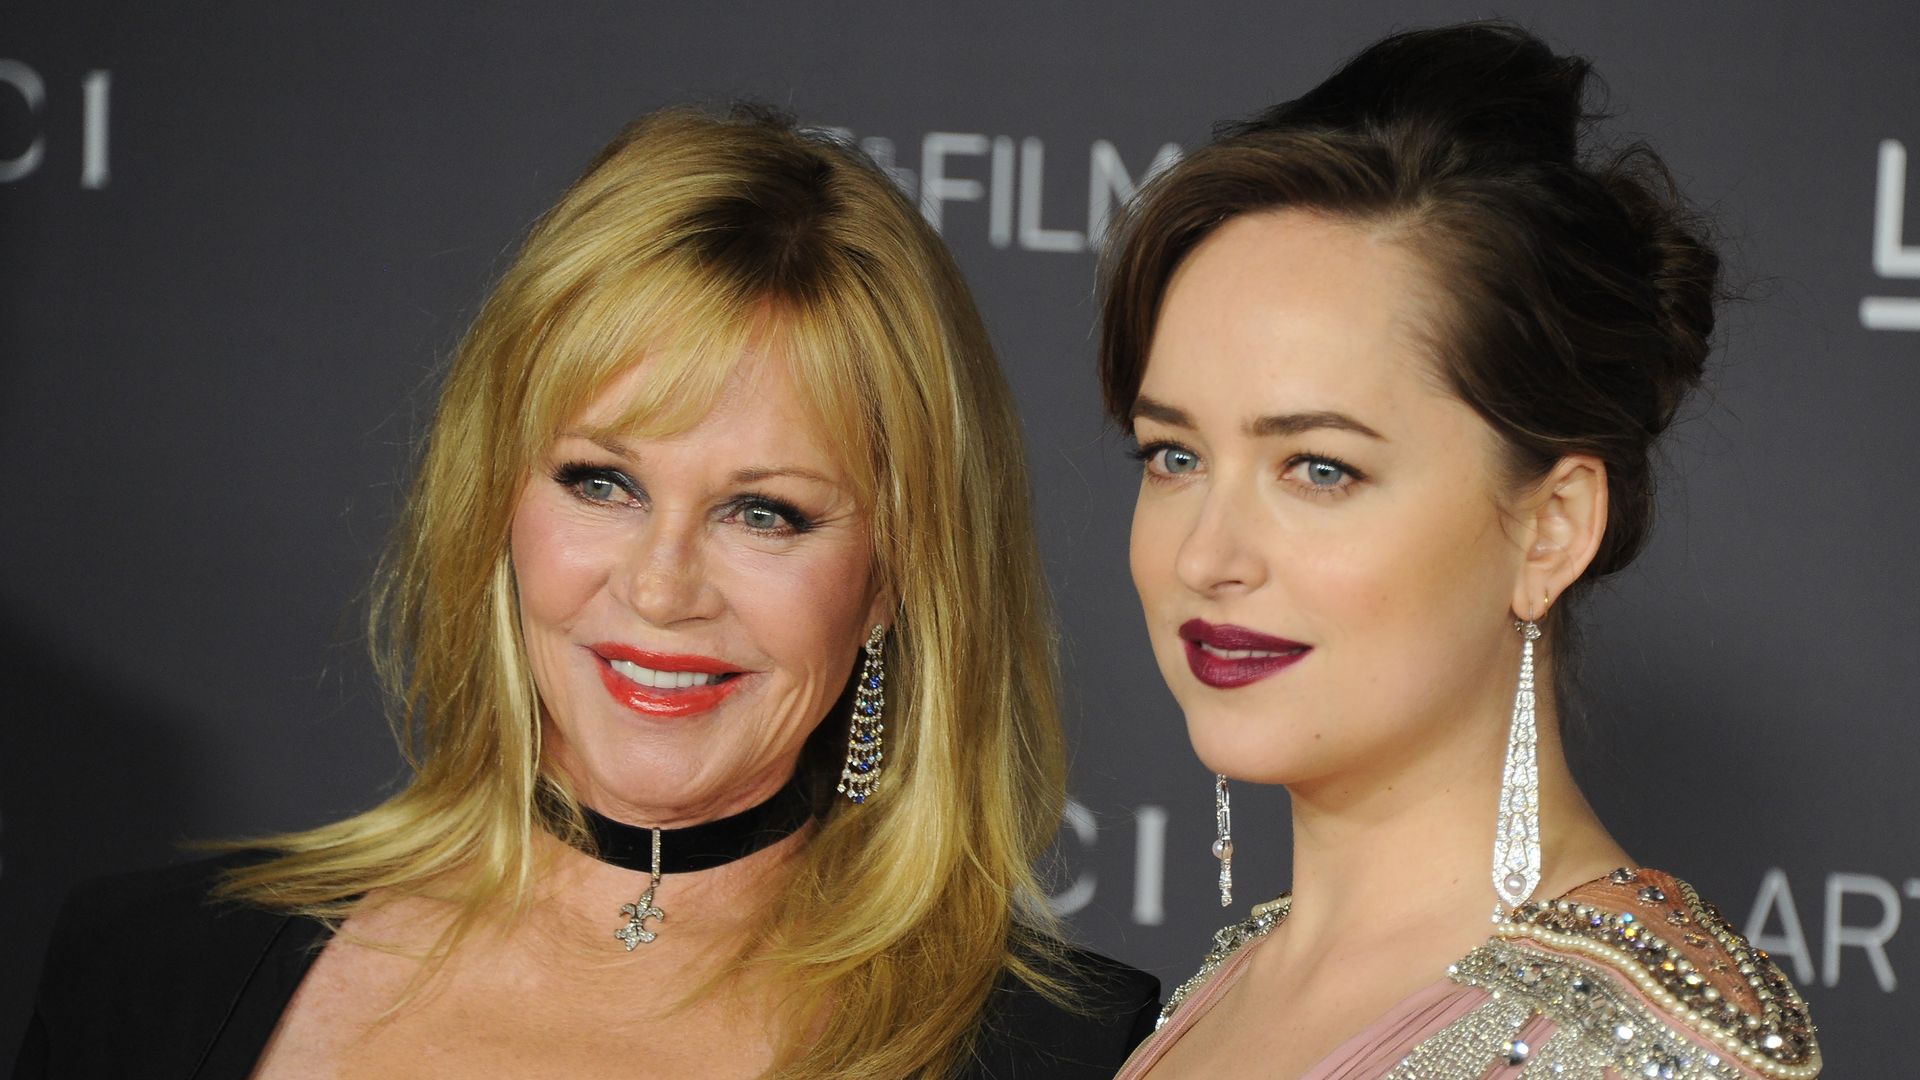 Dakota Johnson, 34, and mother Melanie Griffith, 66, have rare matching moment